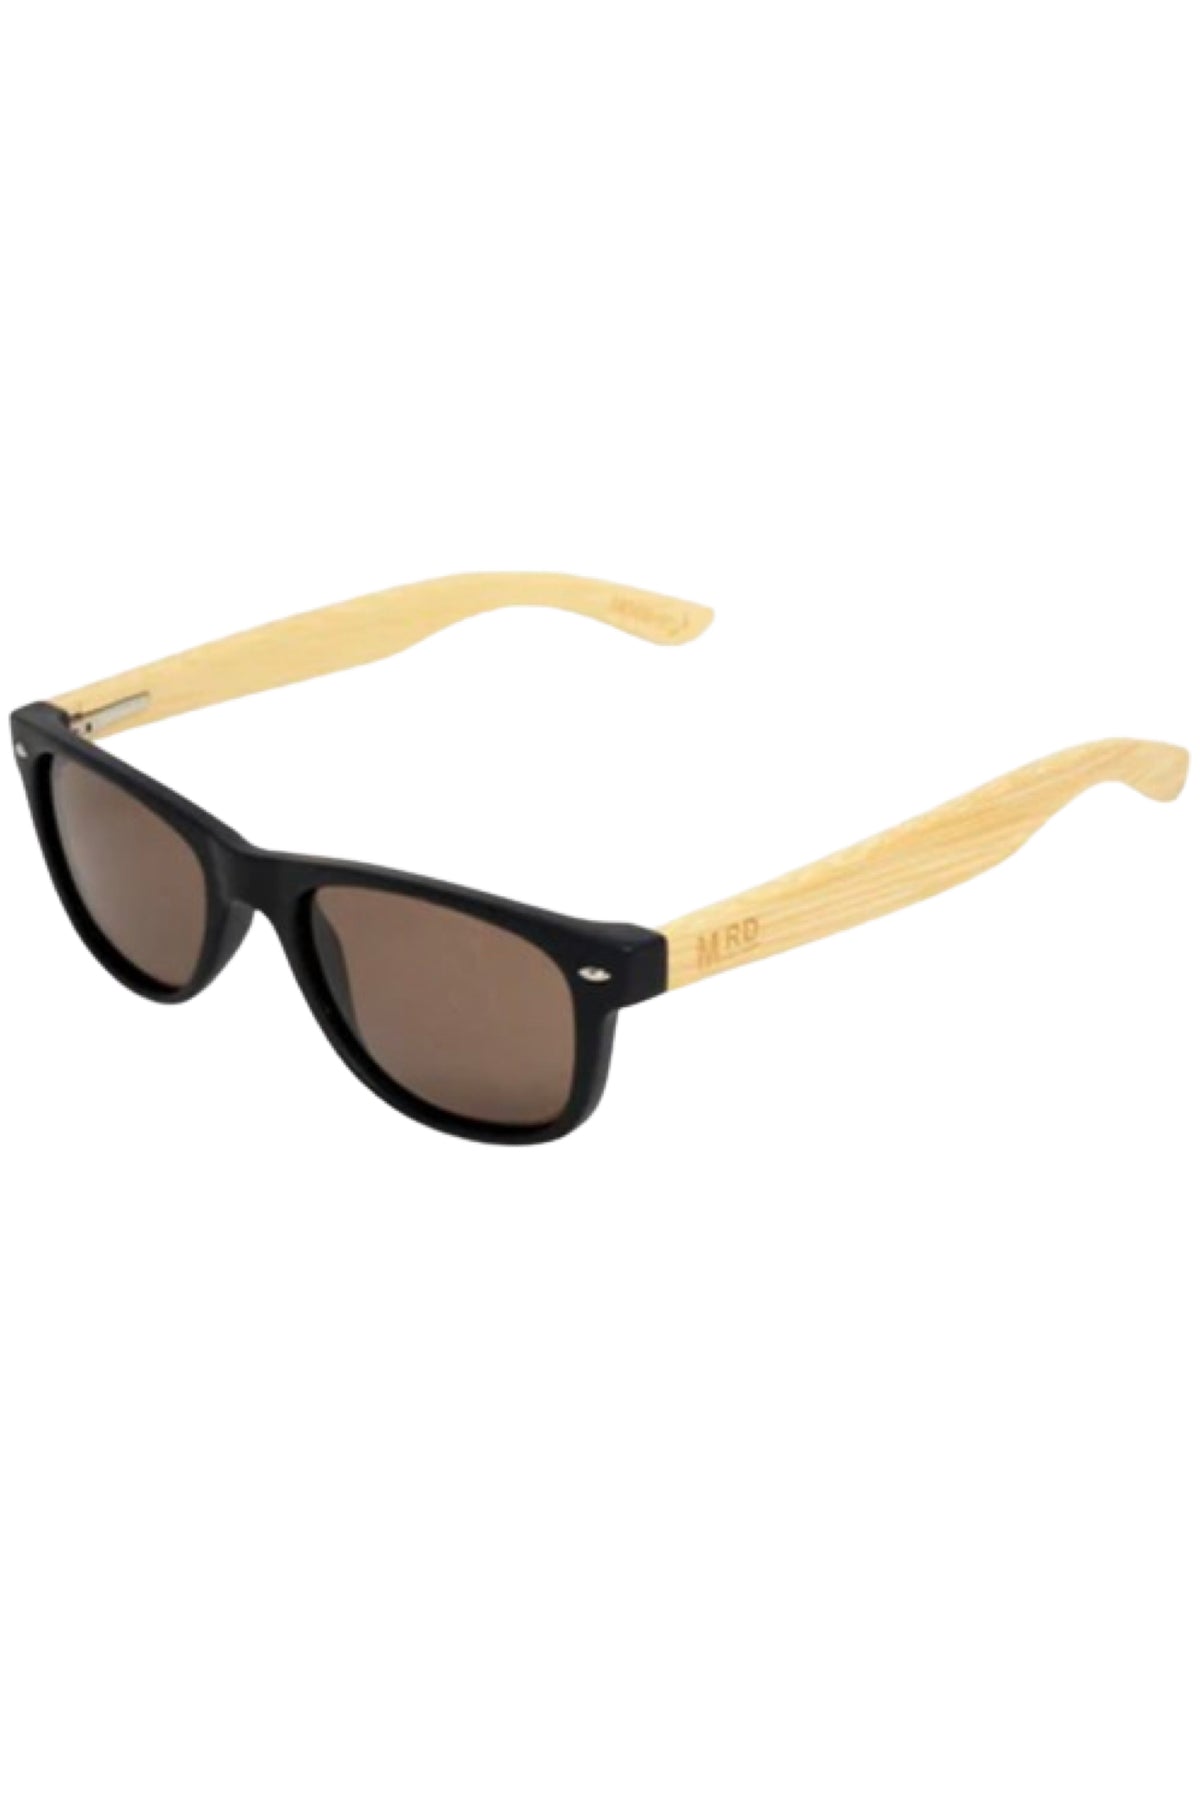 Kids Sunnies Black With Brown Lens